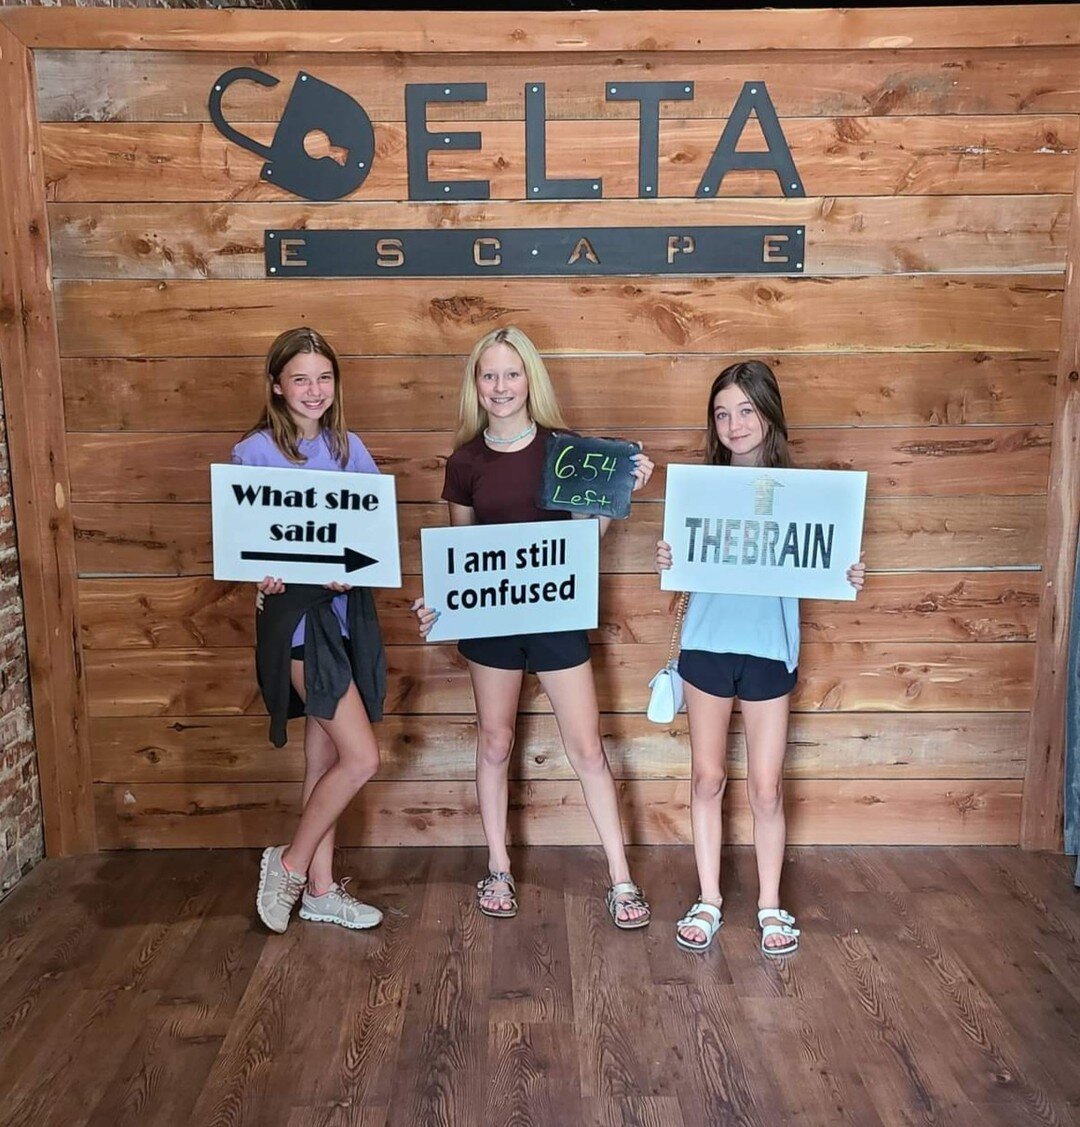 These three came in for a private booking for Delta Haunting and escaped! We heard they had a lot of fun and might be back to tackle our second room soon.

Private bookings outside of normal business hours are at no extra charge. Just give us a call 